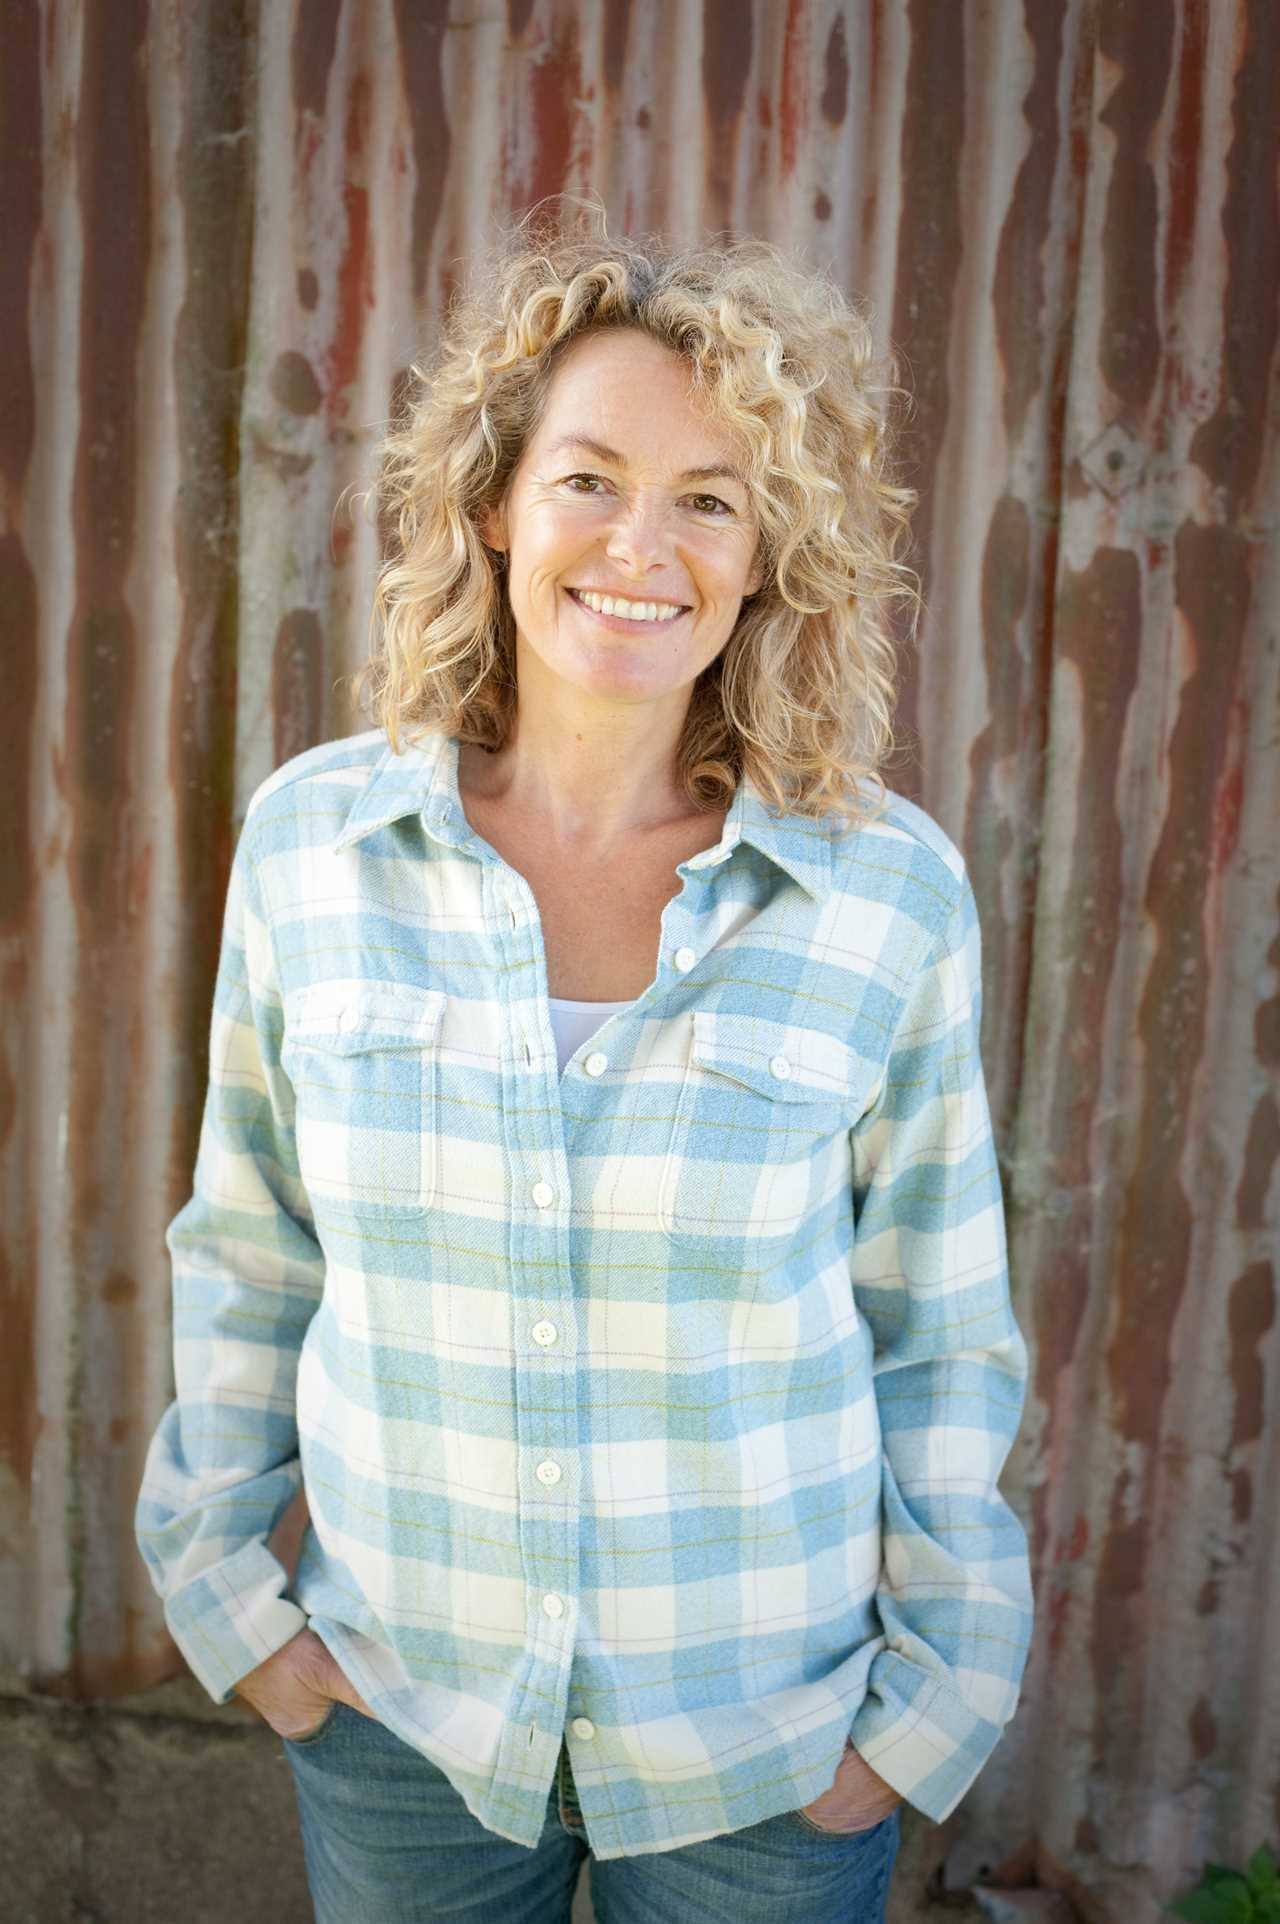 Wildlife presenter Kate Humble reveals she once ate testicle soup – and was nuts about it